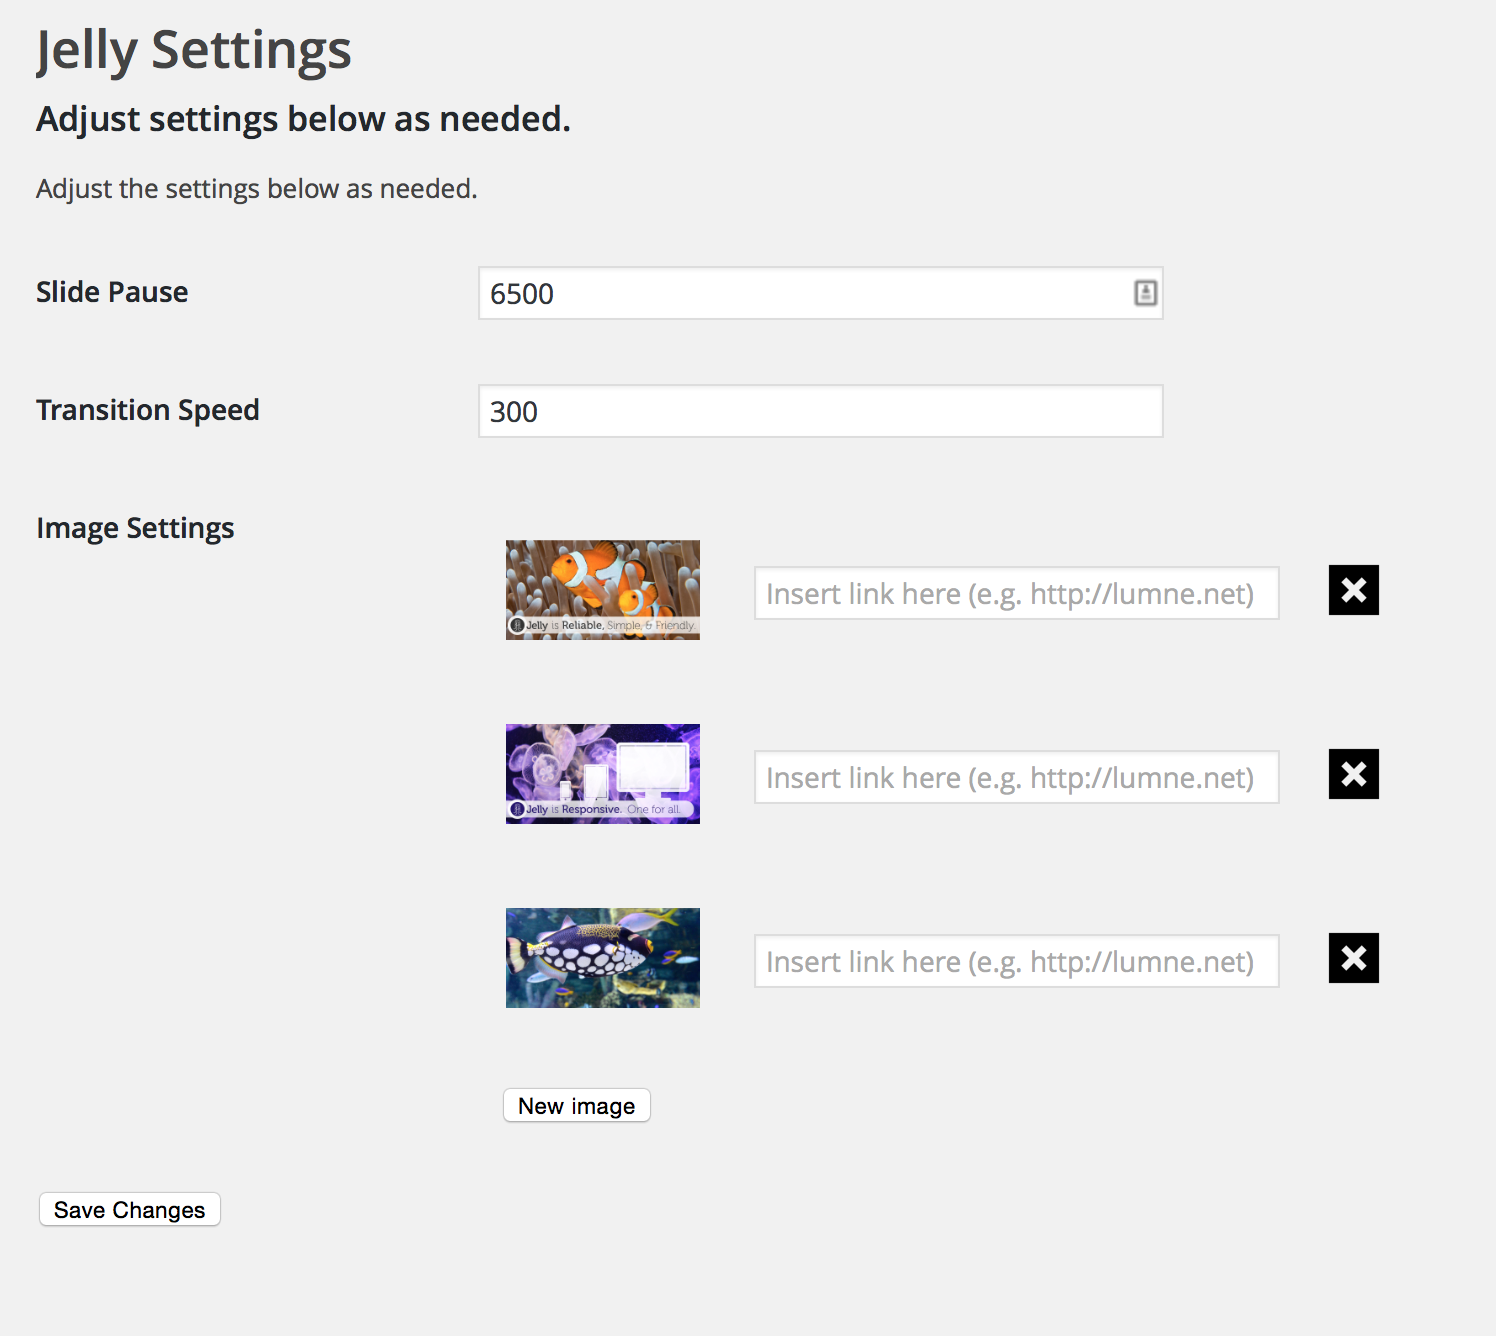 See all your settings on one easy-to-use page.